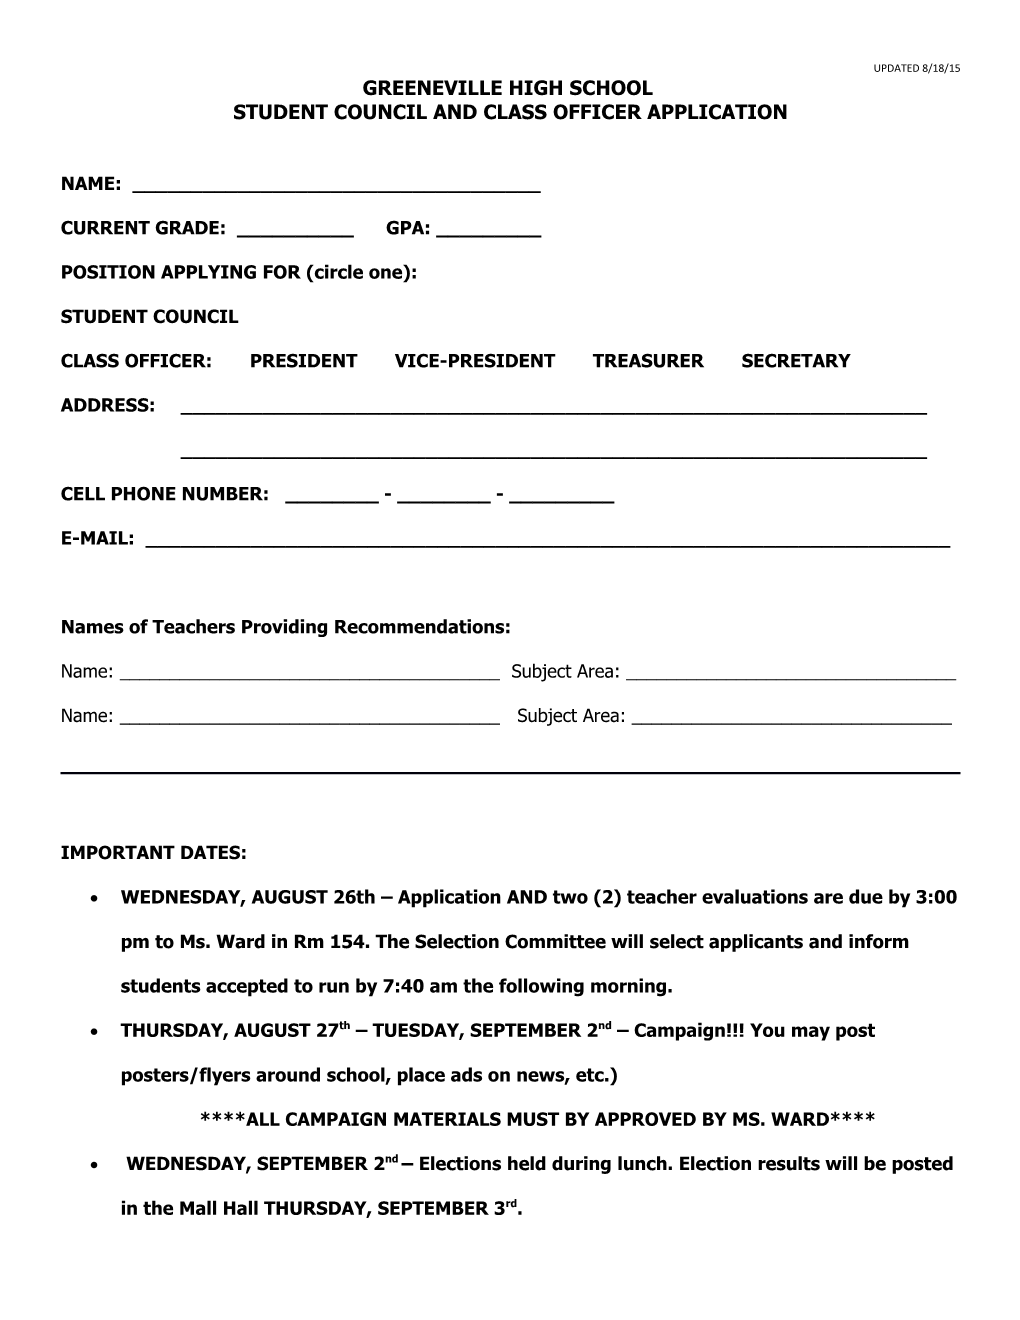 Student Council and Class Officer Application